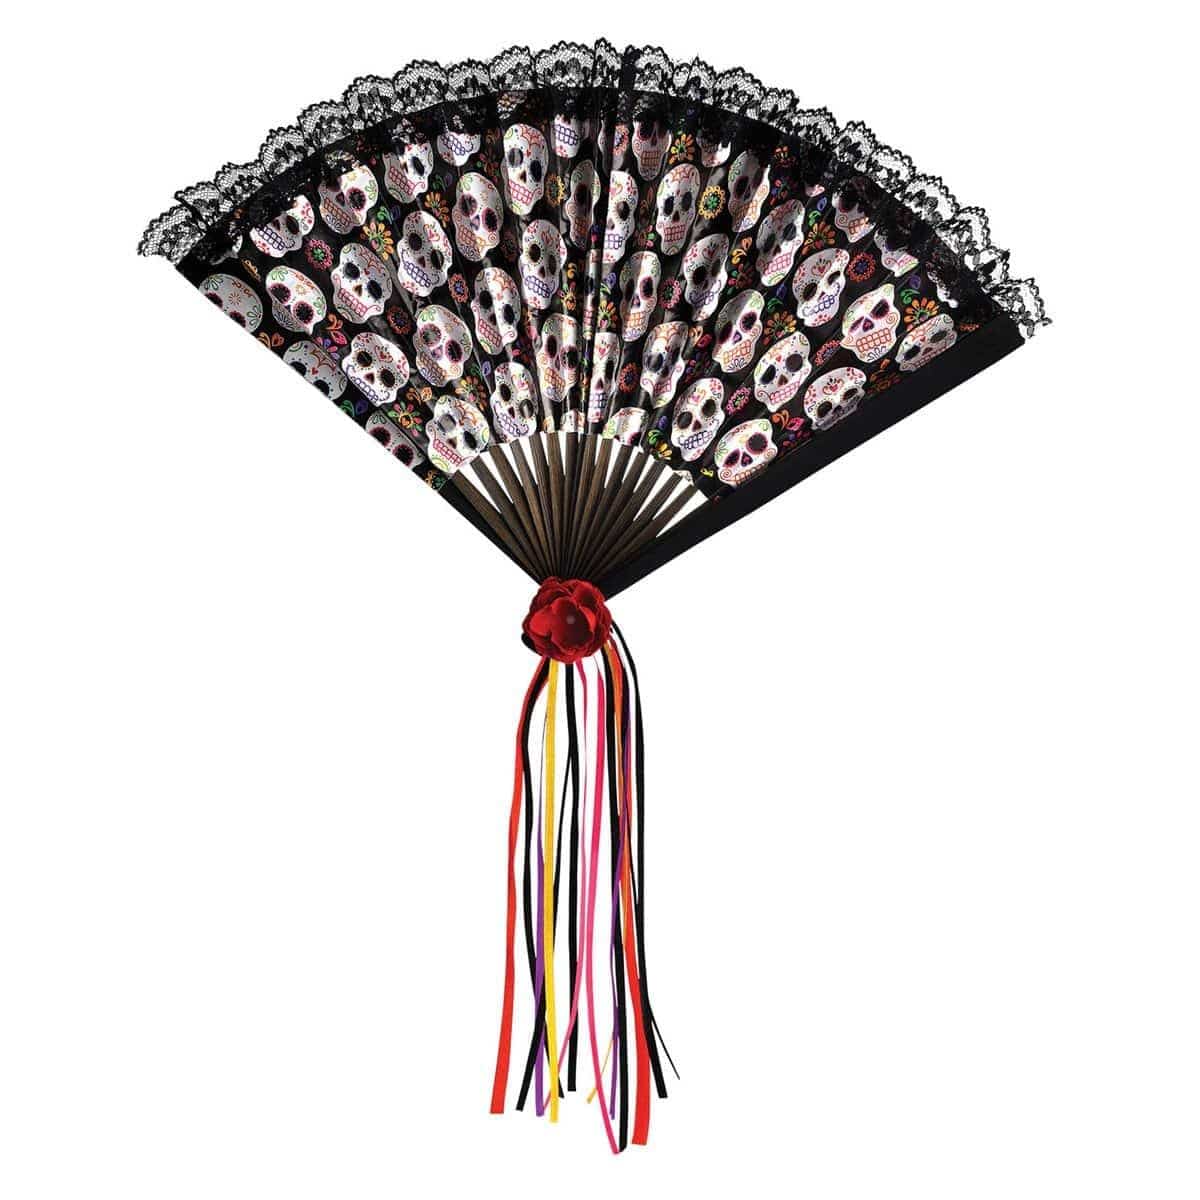 Buy Costume Accessories Day of the dead fan sold at Party Expert